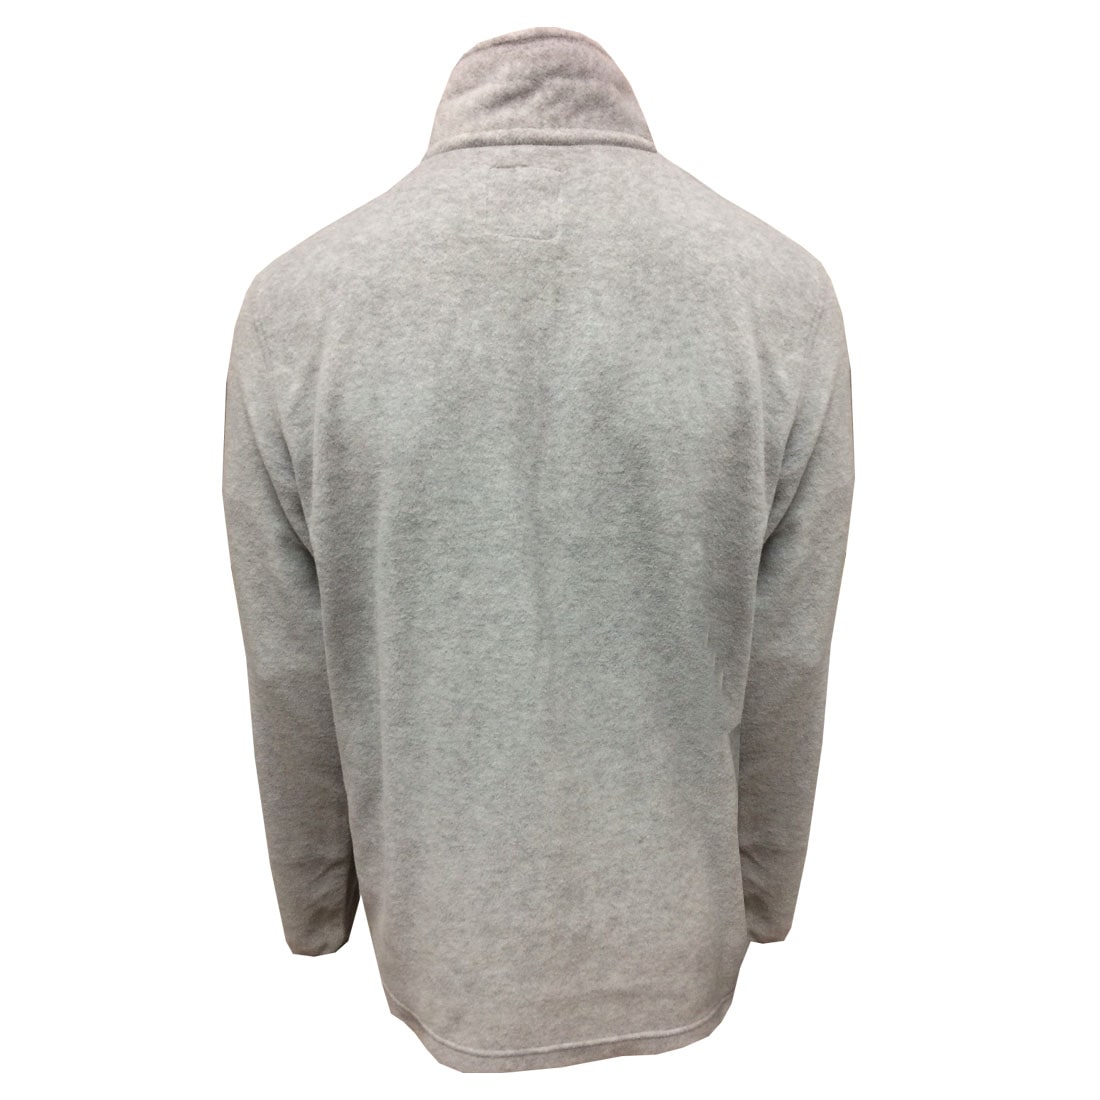 The back view of a Six Nations Grey Half Zip Fleece featuring the Guinness® Six Nations Logo.